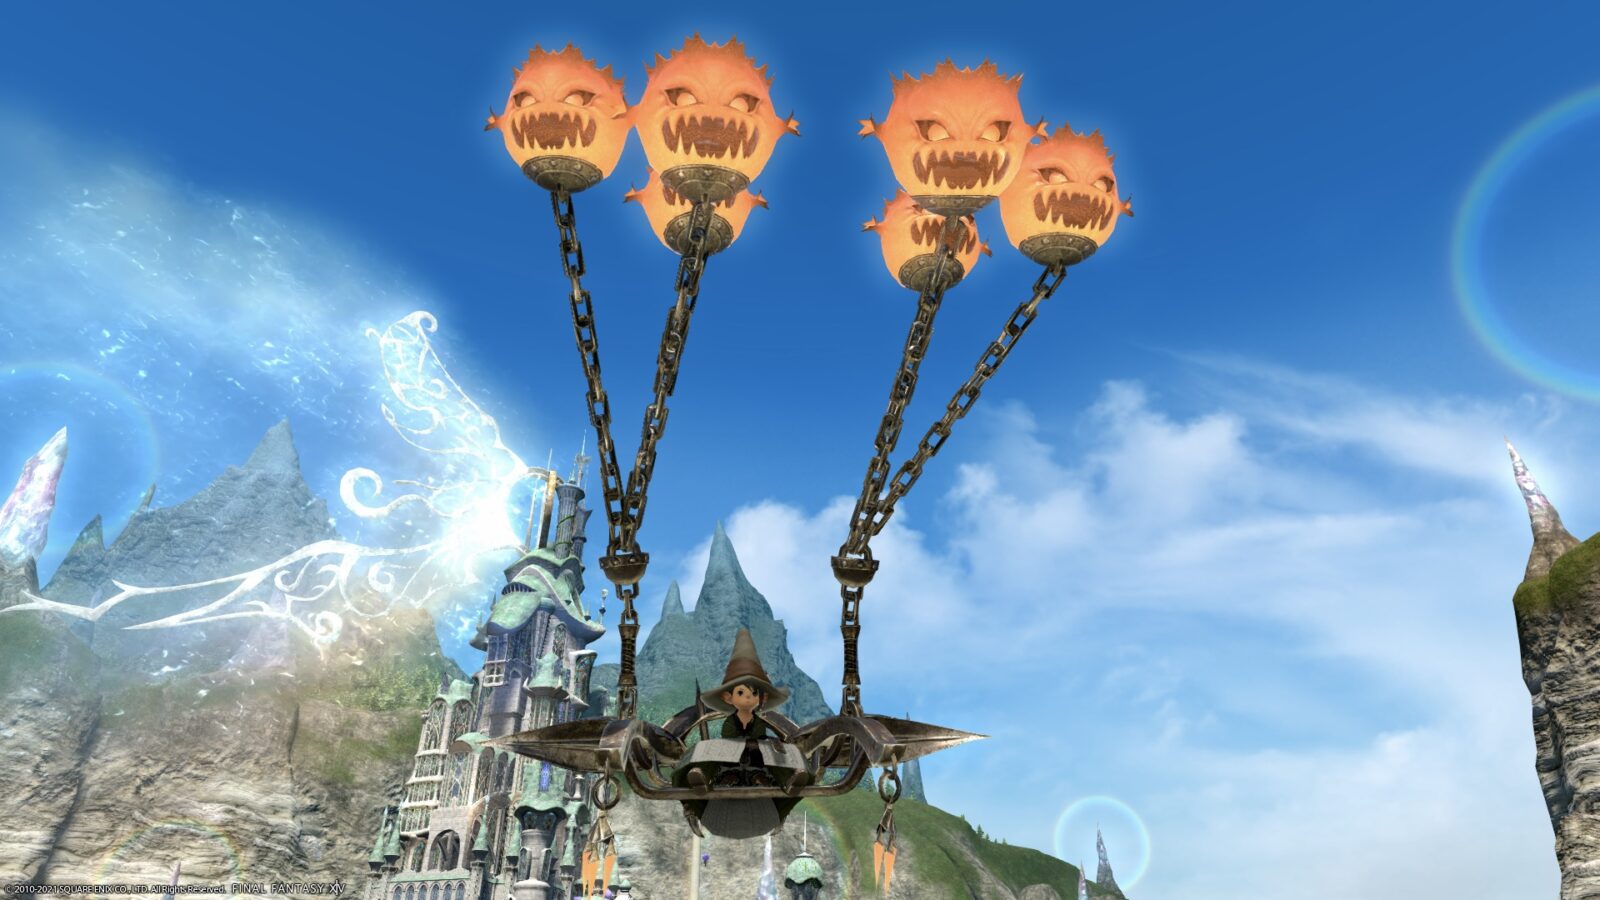 Cute Bomb Balloon Flying Bench Kobold Quest Mount “Bomb Palanquin 